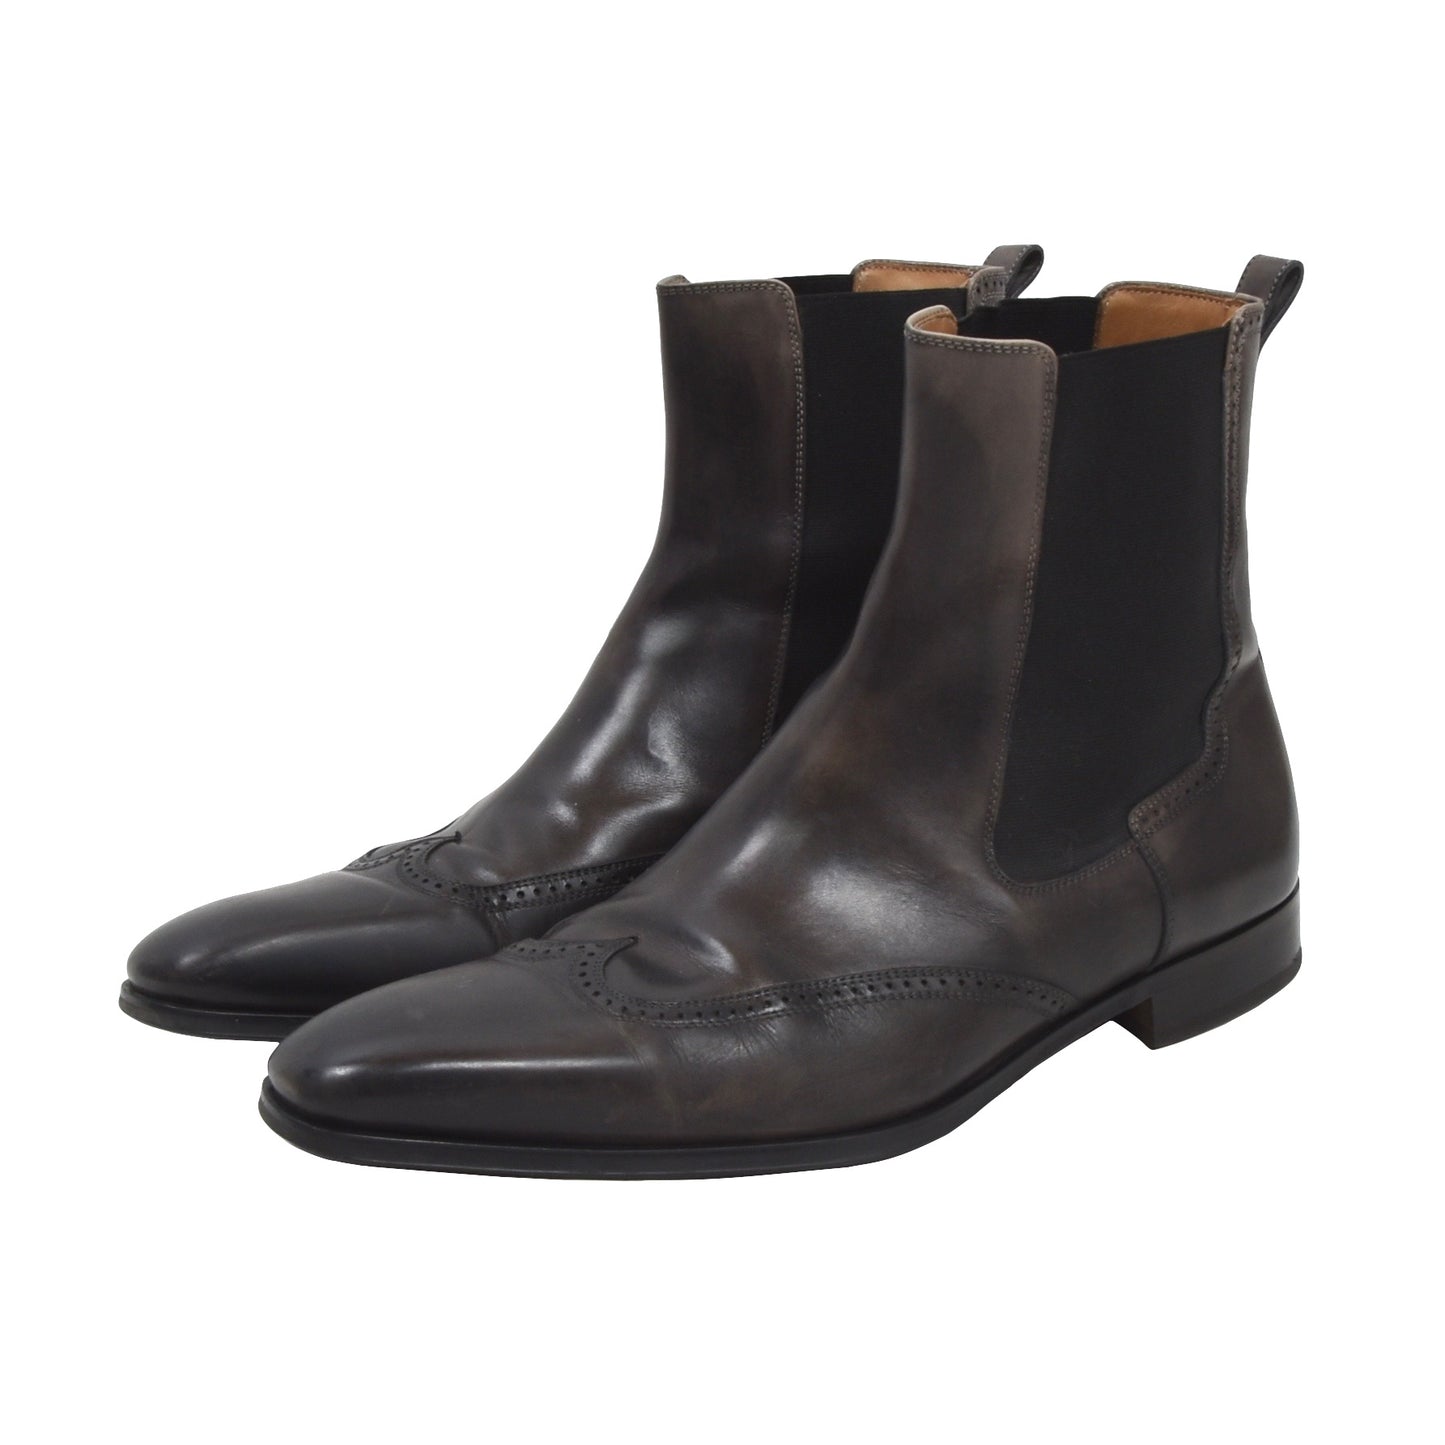 Magnanni Chelsea Boots Size 42 - Grey-Brown